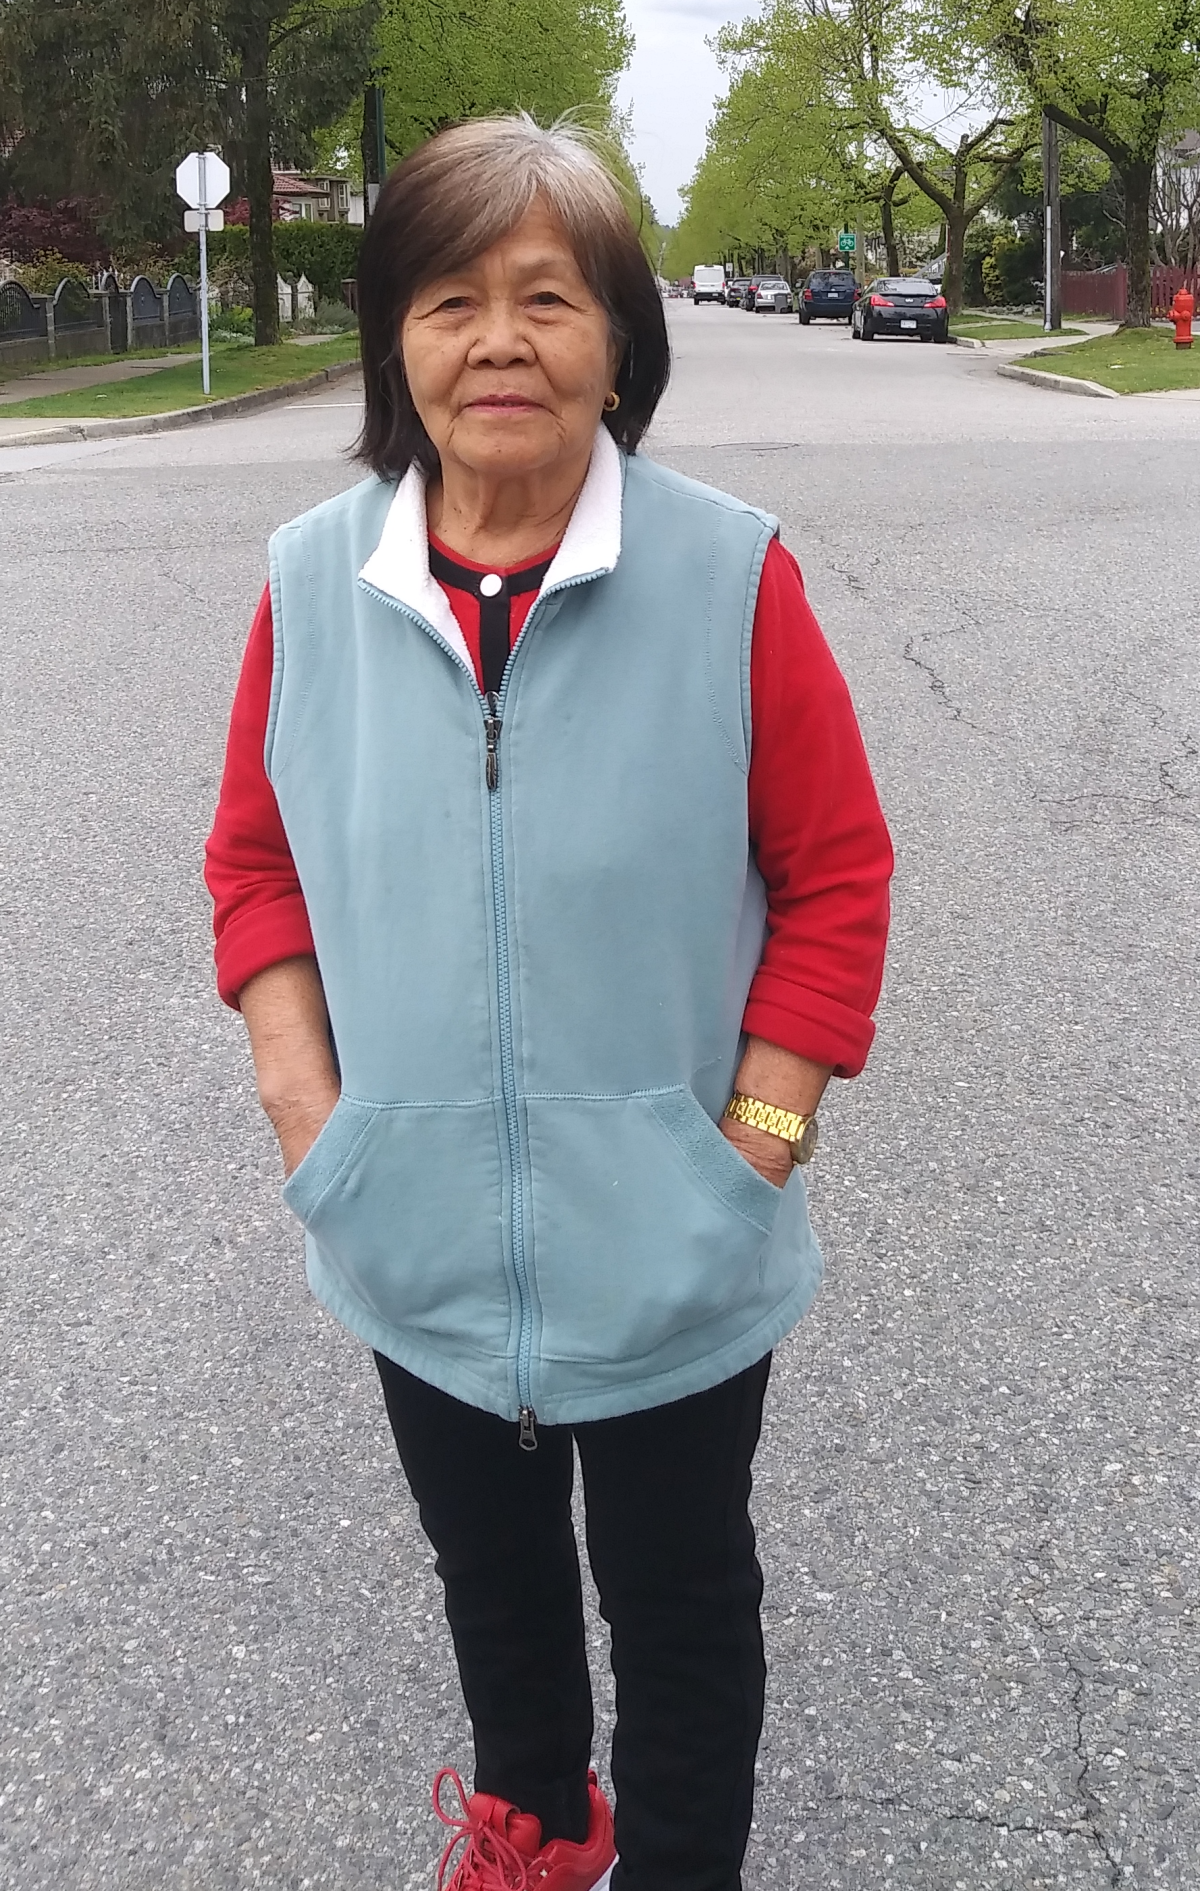 Vancouver Police are requesting the public’s help in locating a missing 77-year-old female, Teresa Gabriel, who suffers from dementia.